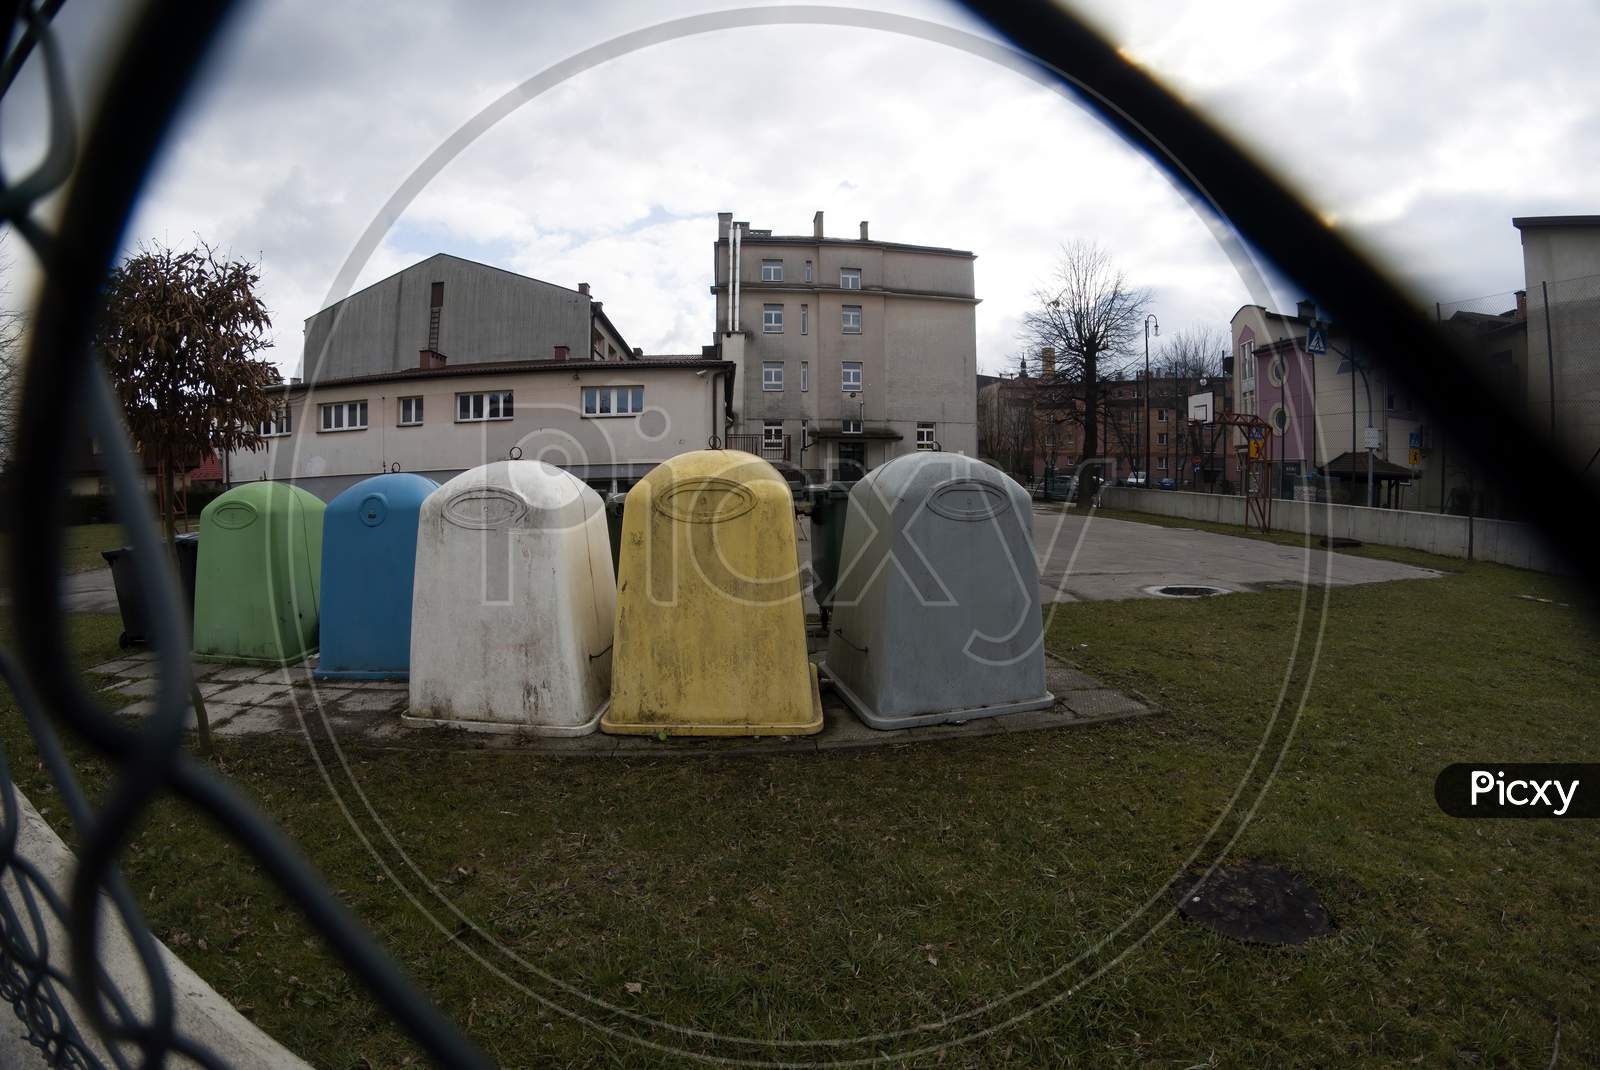 Wide Angle View Through The Fence Of Bunch Of Trash Containers Or Dust Bins For Garbage Placed In The School Premises In Southern Poland Town. Europe